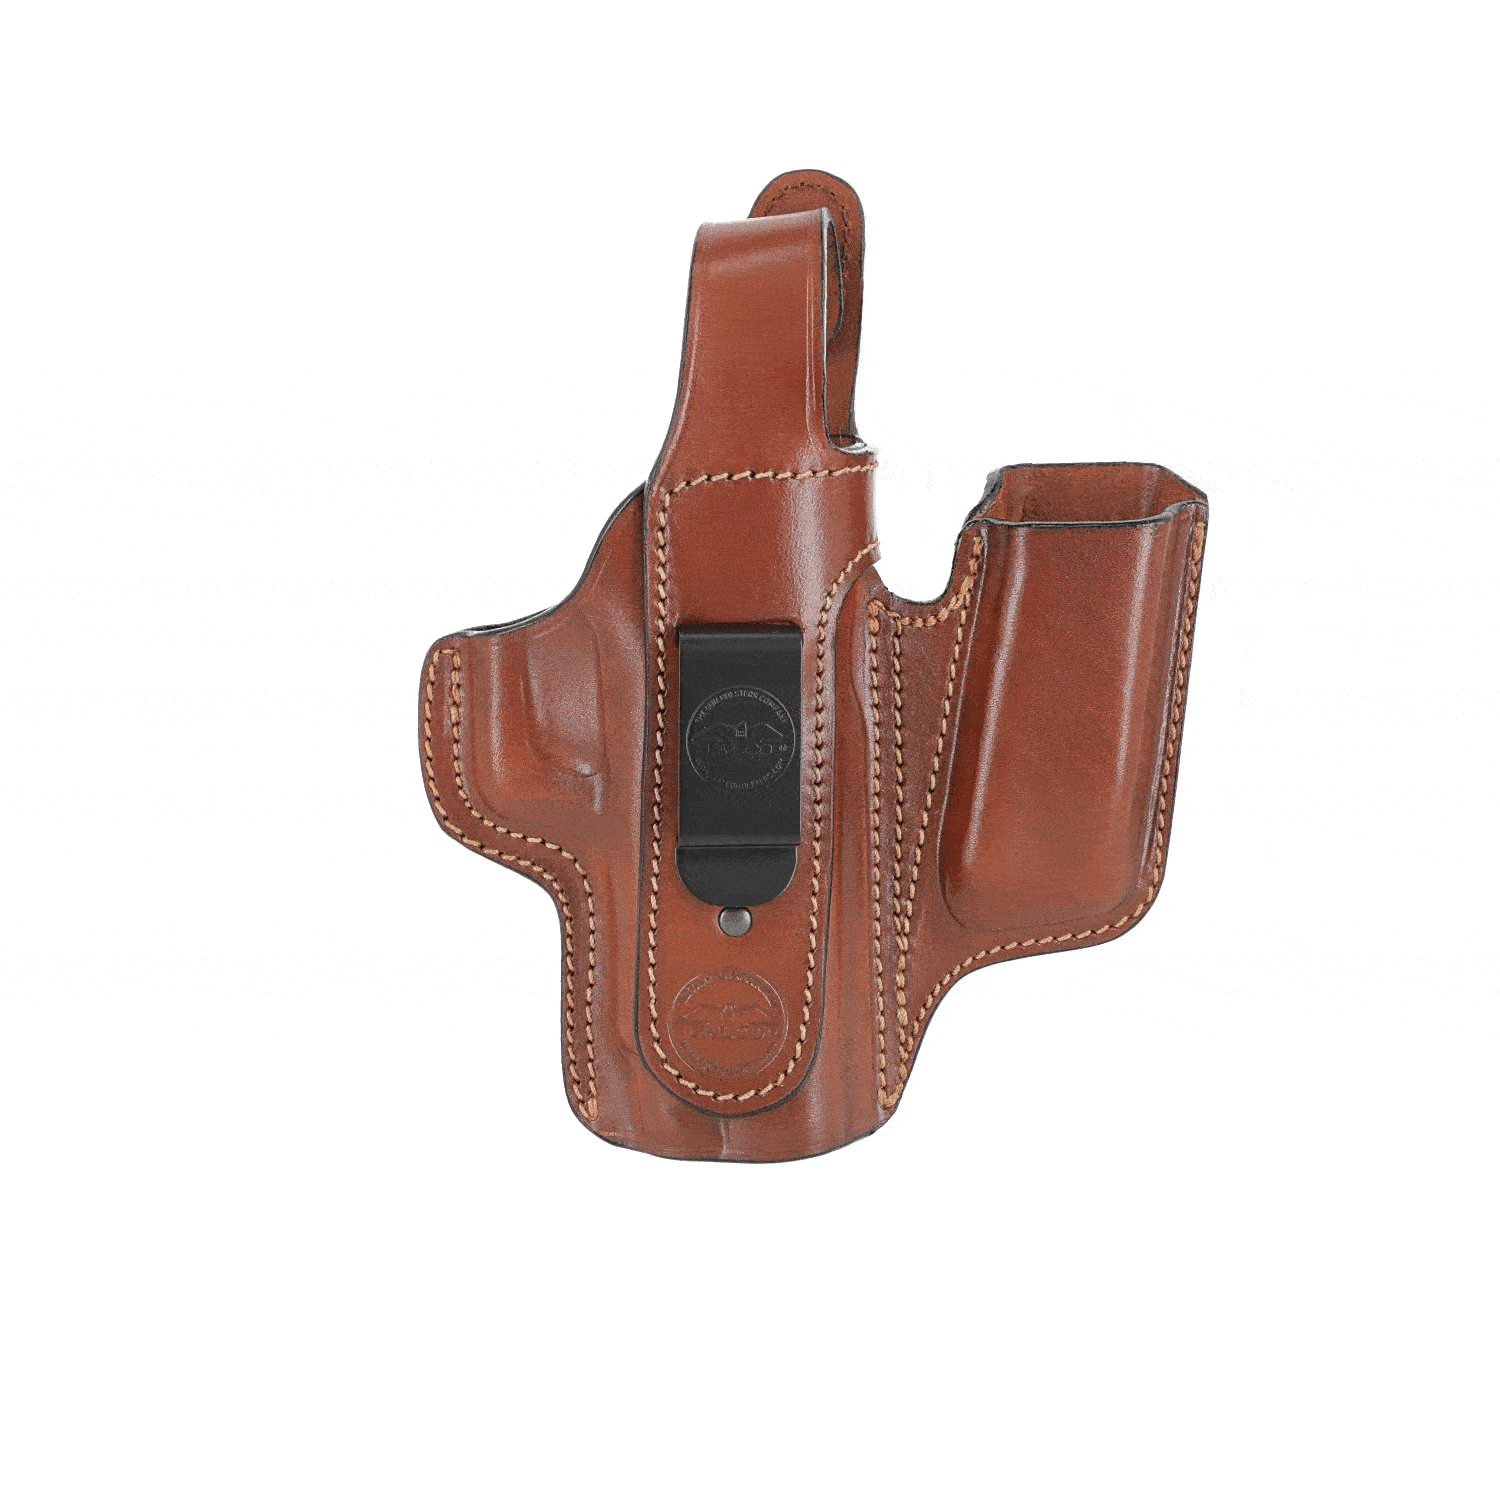 Modern leather holster PSM Holster with clasp Leather Case for spare magazine 